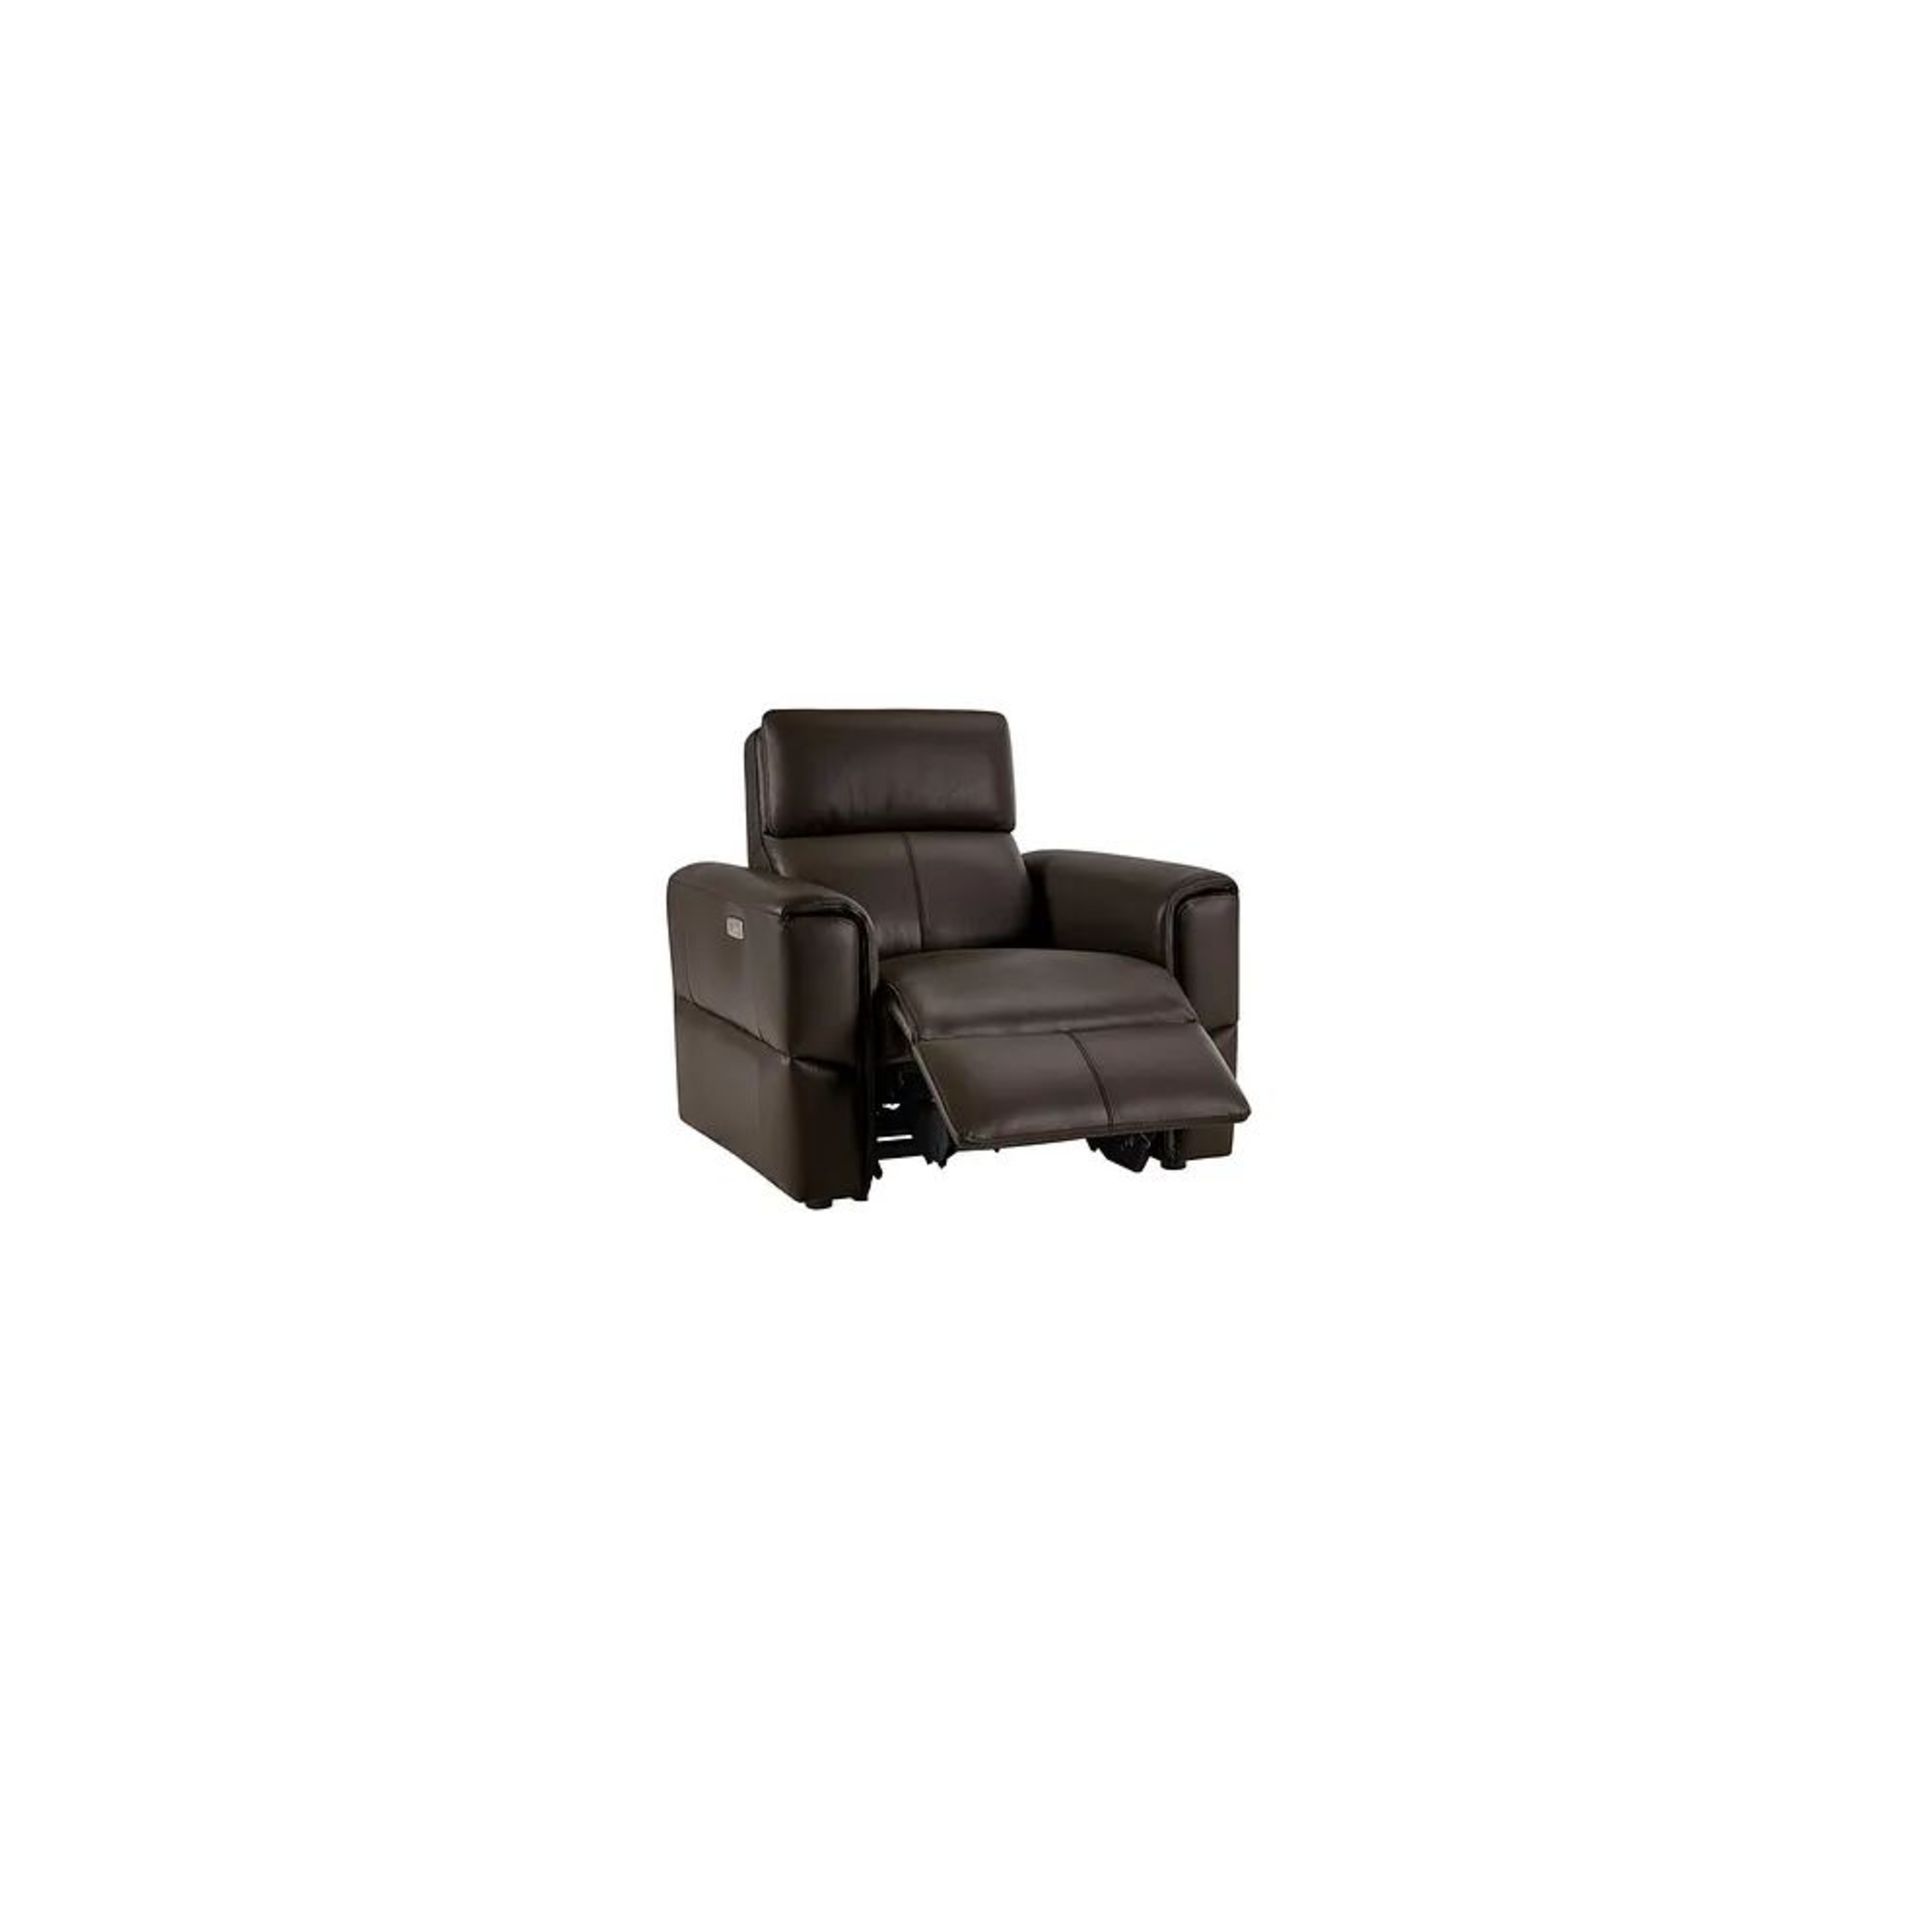 BRAND NEW SAMSON Electric Recliner Armchair - TWO TONE BROWN LEATHER. RRP £1249. Showcasing neat, - Image 3 of 9